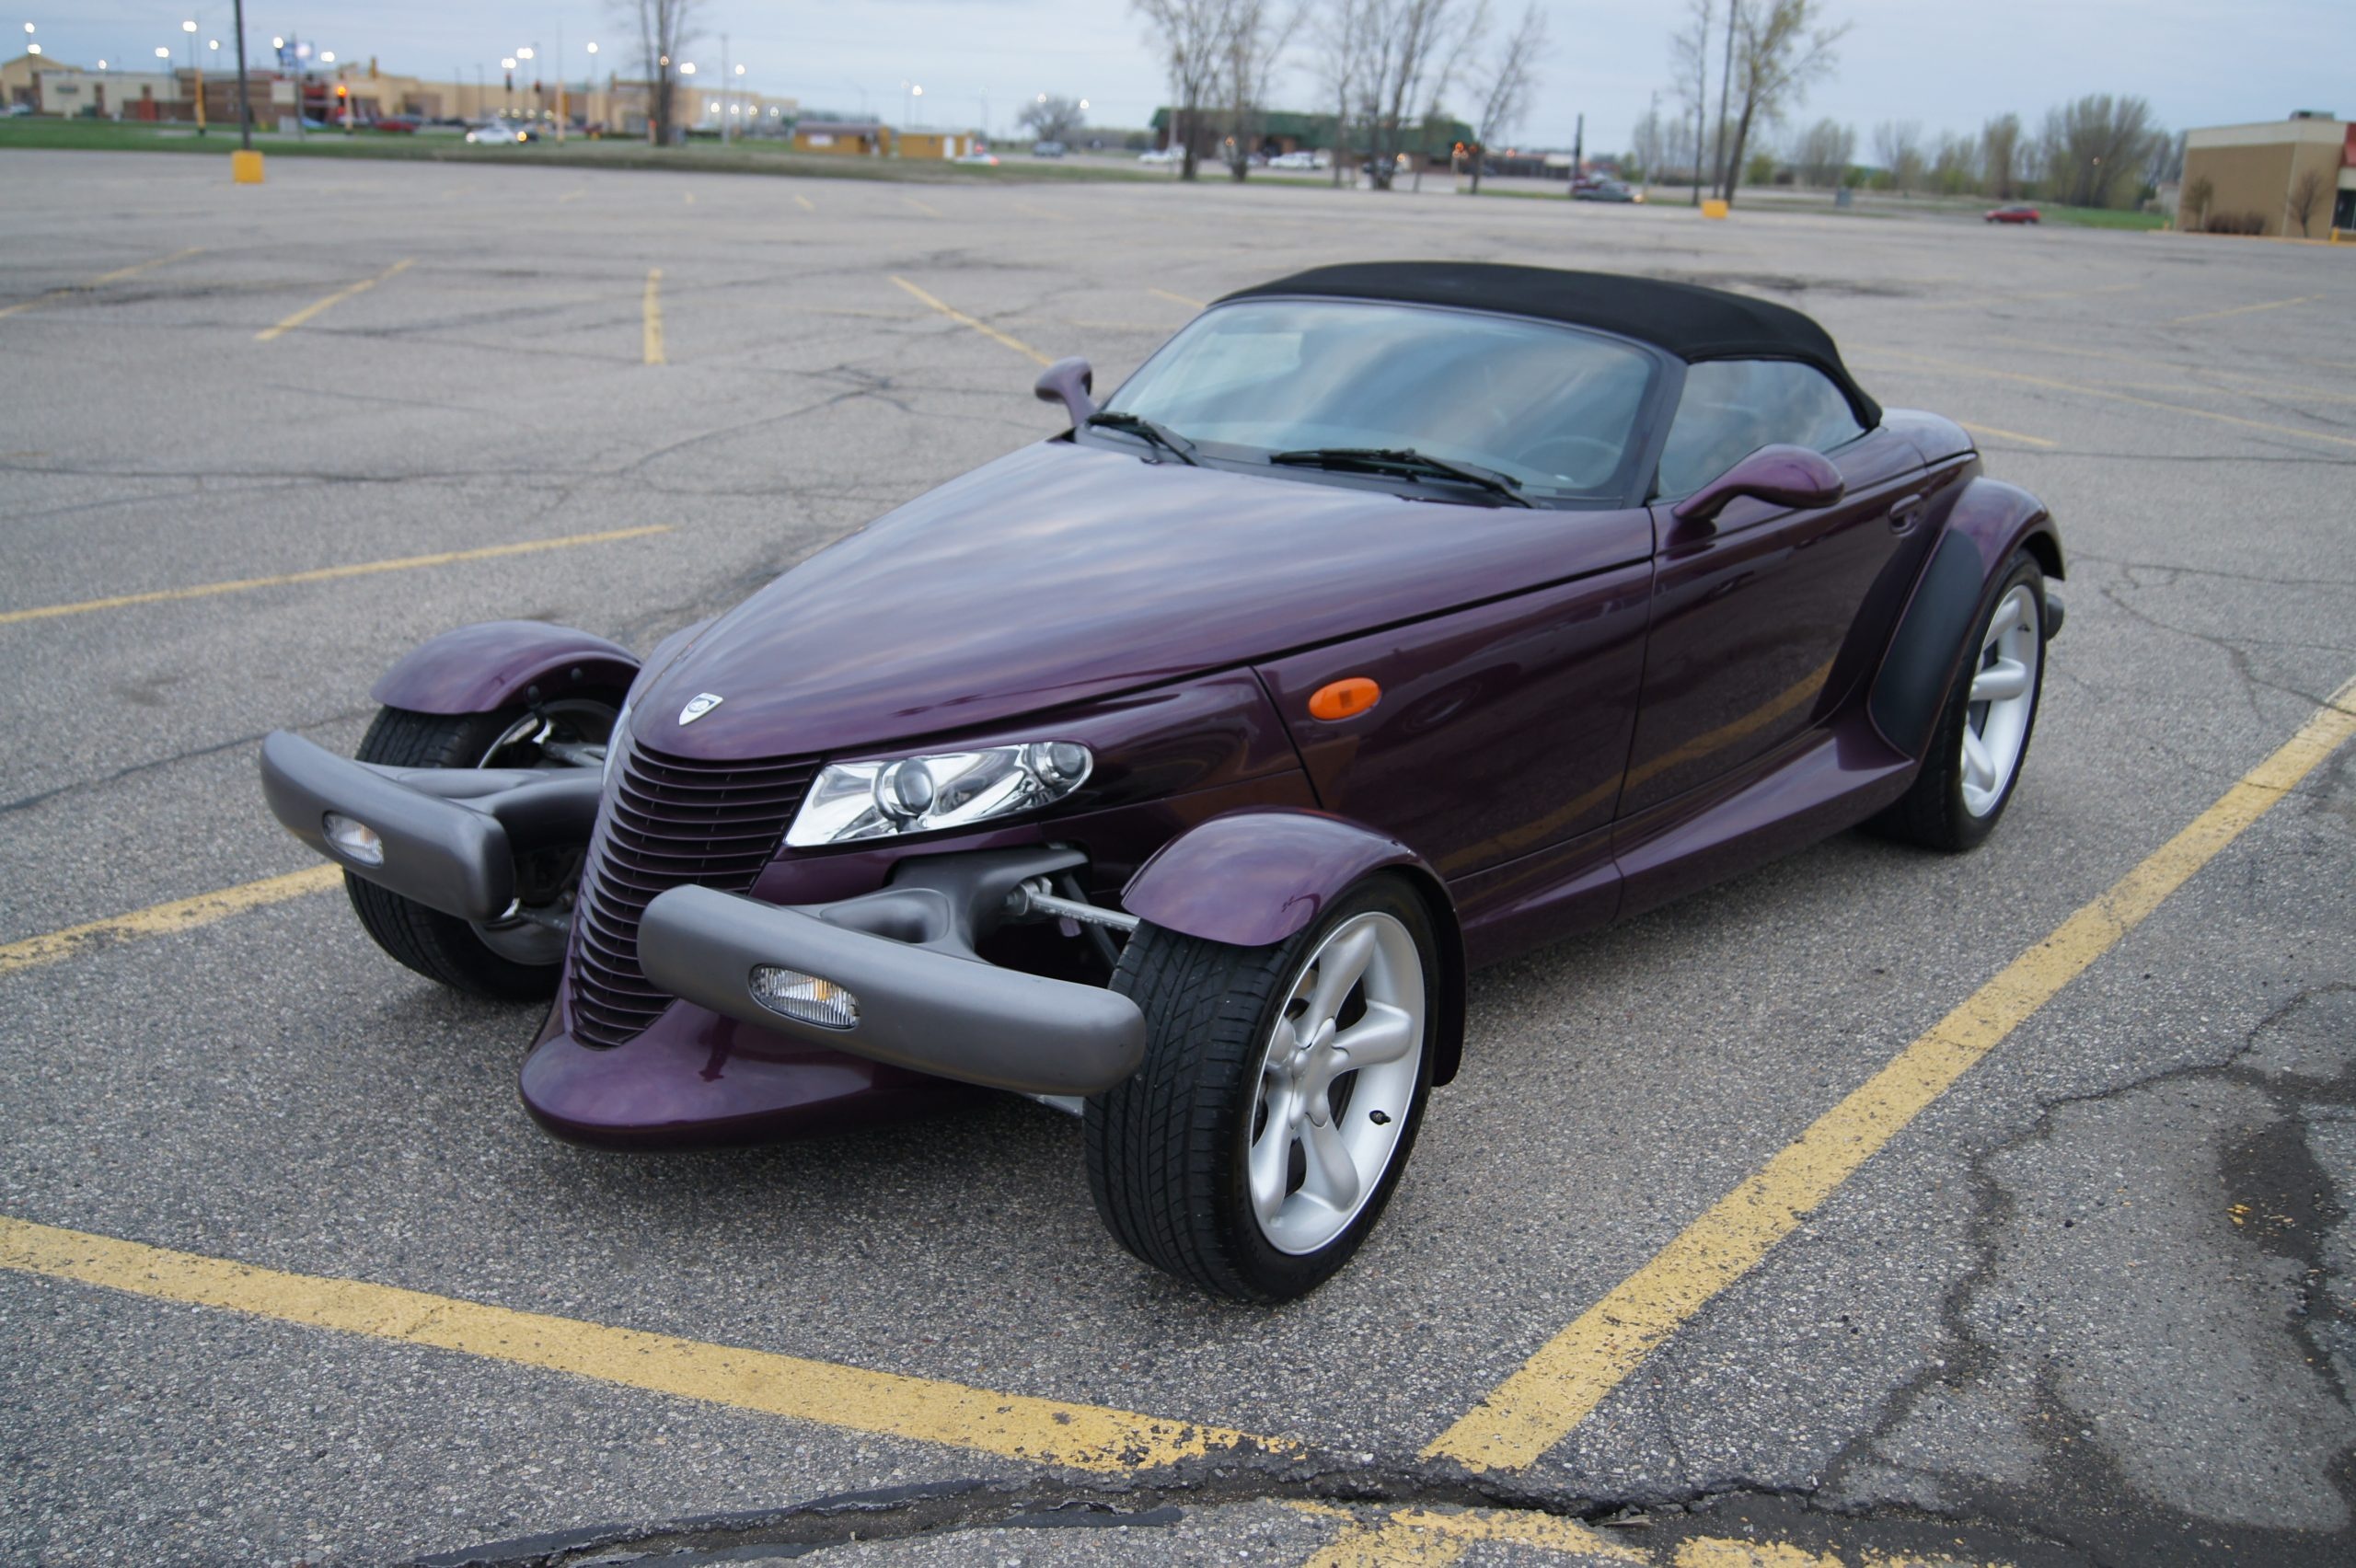 Plymouth Prowler, Last Plymouth Prowler, Automotive history, Collectable car, 2560x1710 HD Desktop